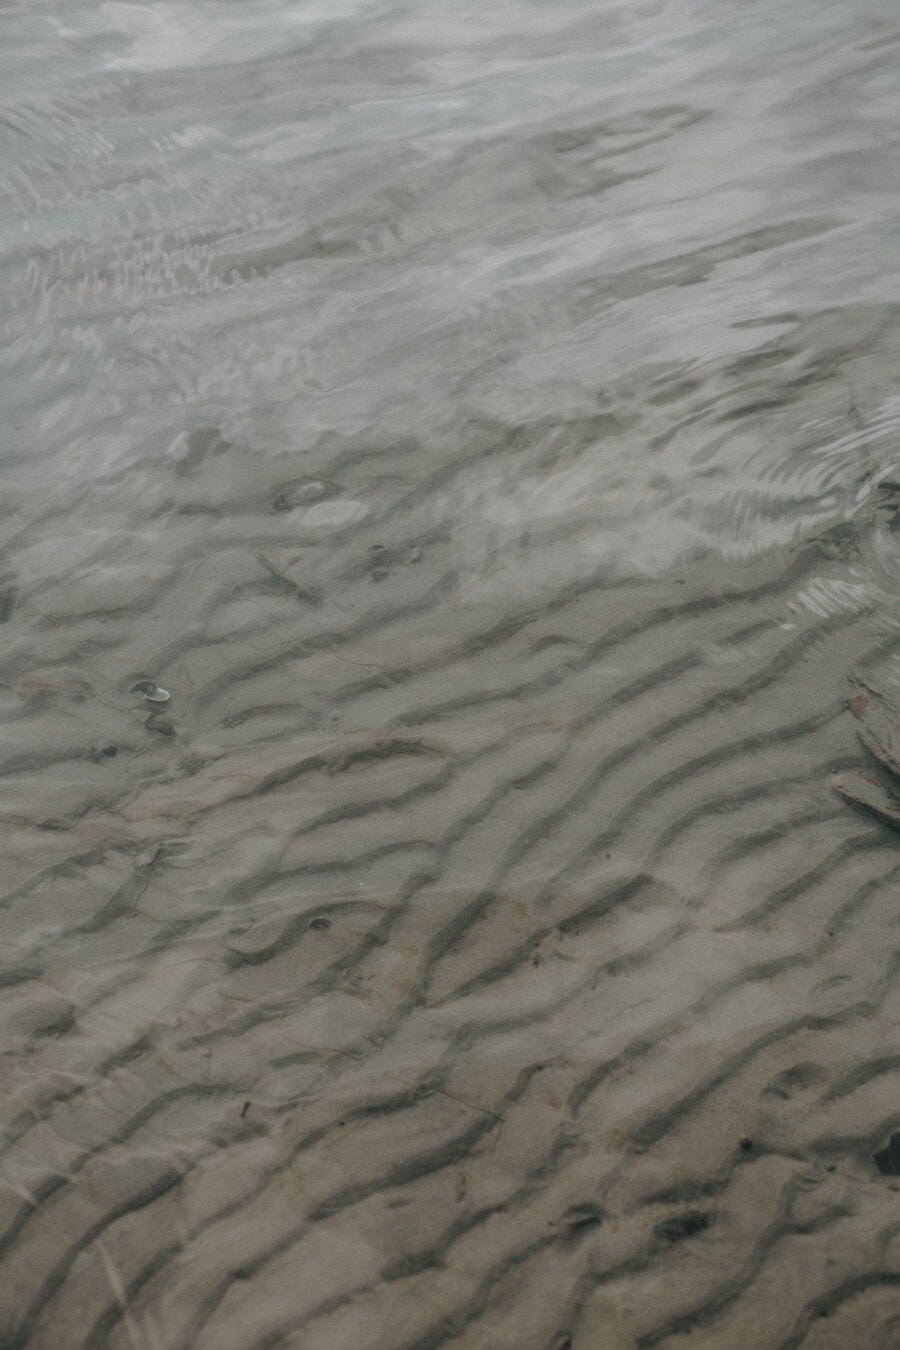 sand, low tide, mud, underwater, water level, soil, earth, water, nature, texture